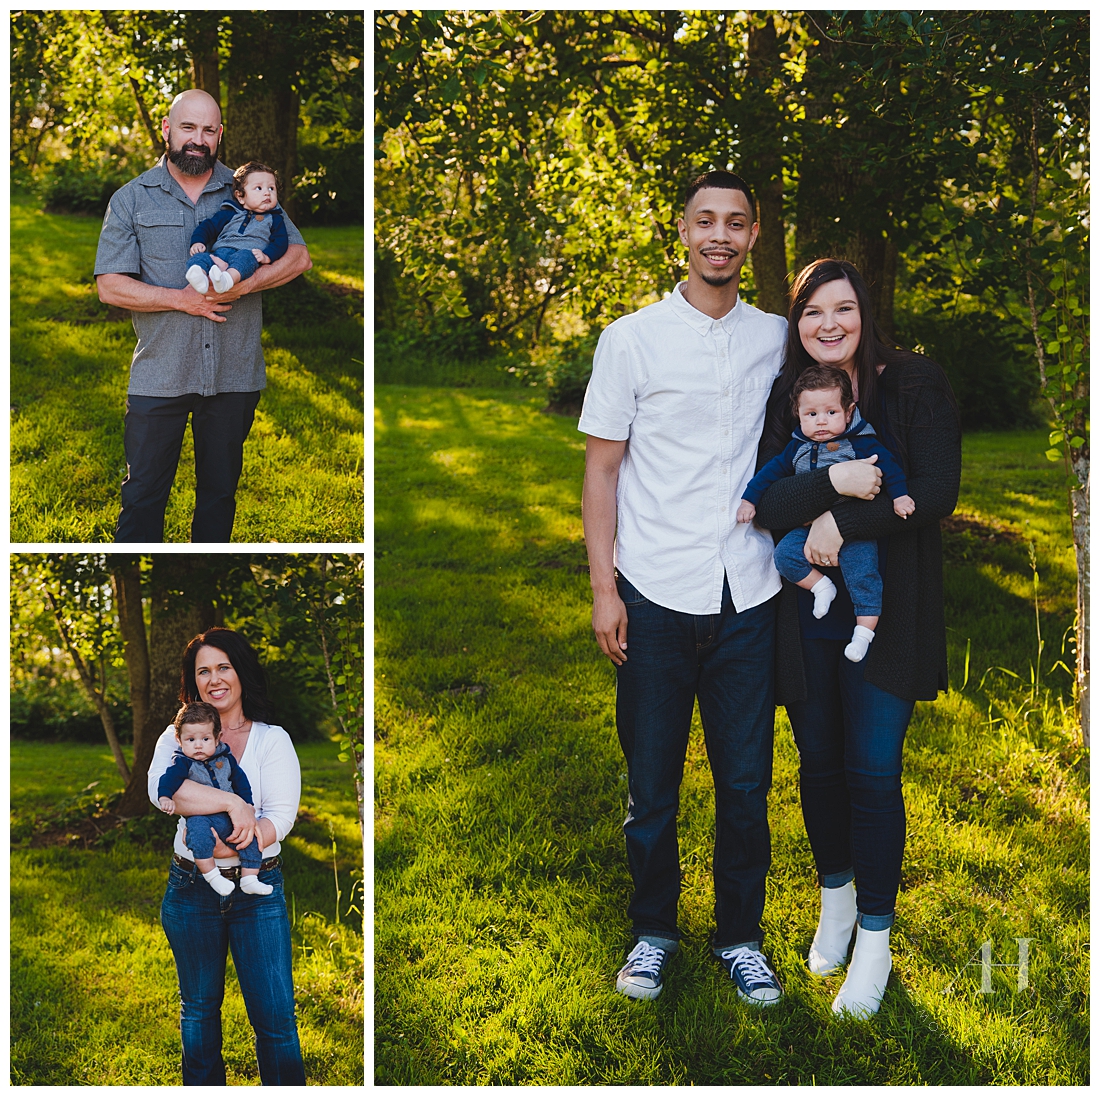 Cute Family Portraits with an Infant | How to Coordinate Outfits for Portraits, Casual Outfit Ideas, Cute Families, Timeless Family Portraits, Summer in Tacoma, Where to Take Family Portraits | Photographed by Tacoma Photographer Amanda Howse